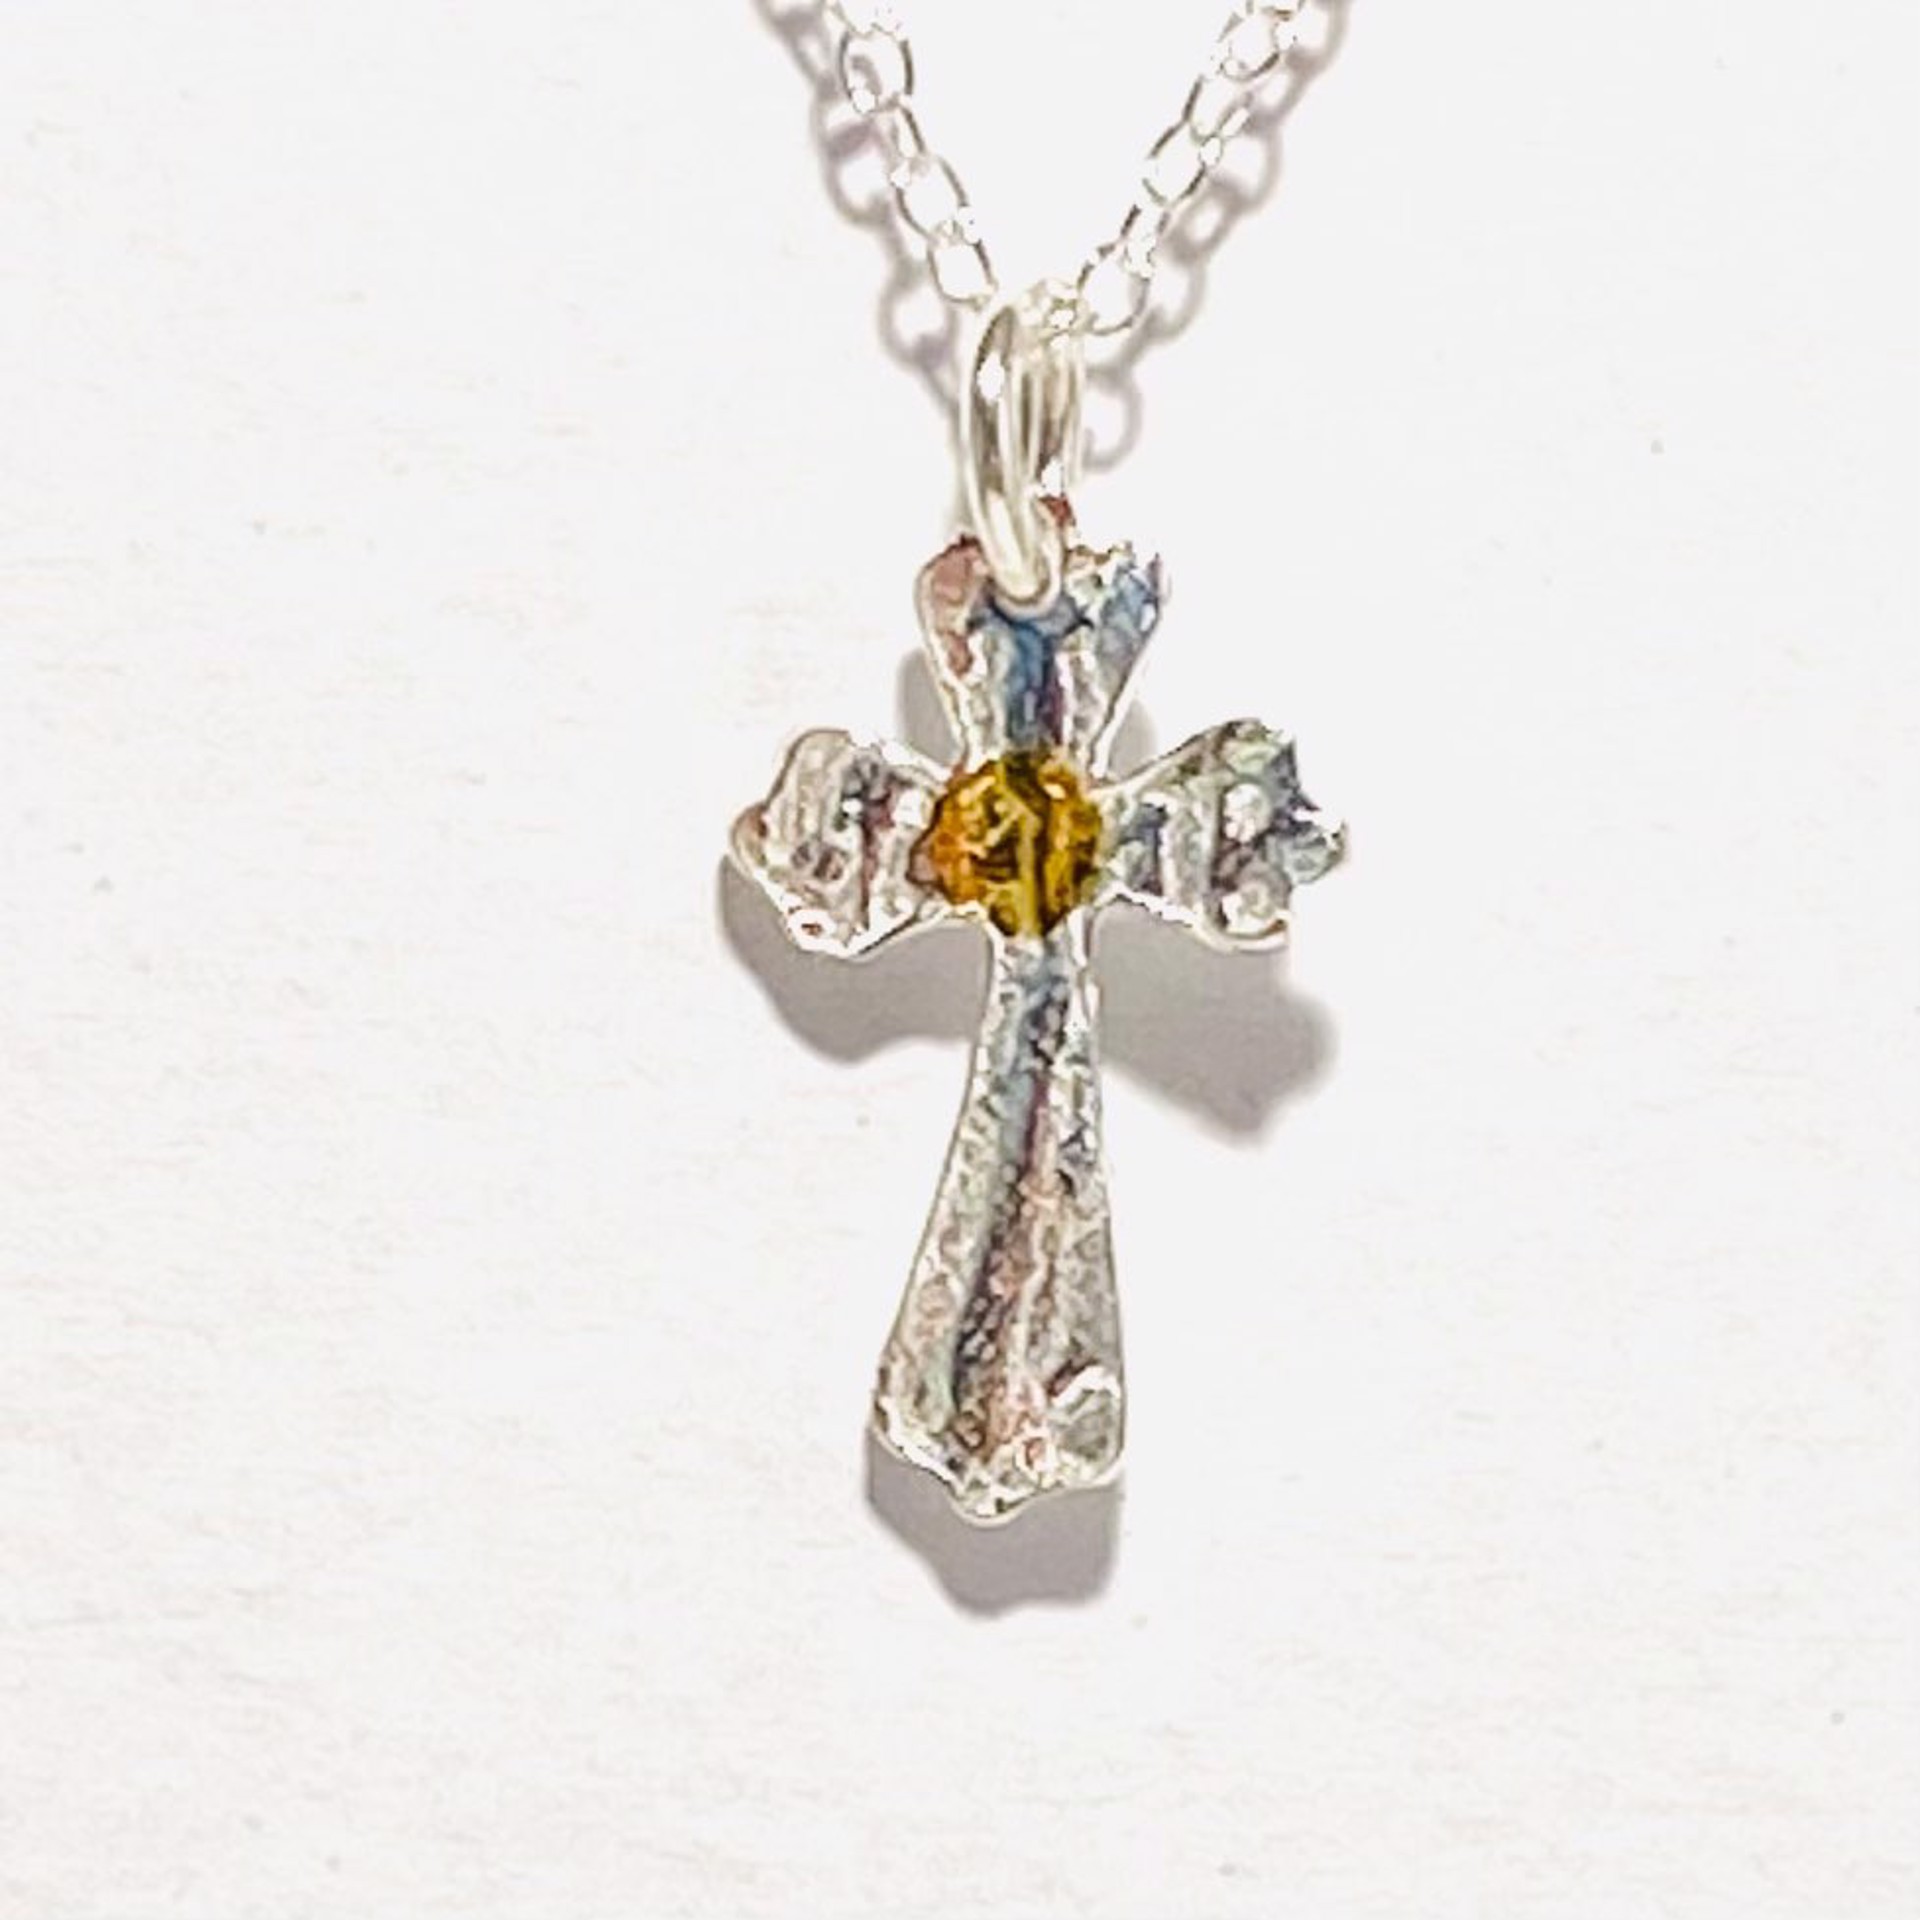 KH22-73 Keum-Boo Fine Silver and Gold Cross Necklace by Karen Hakim